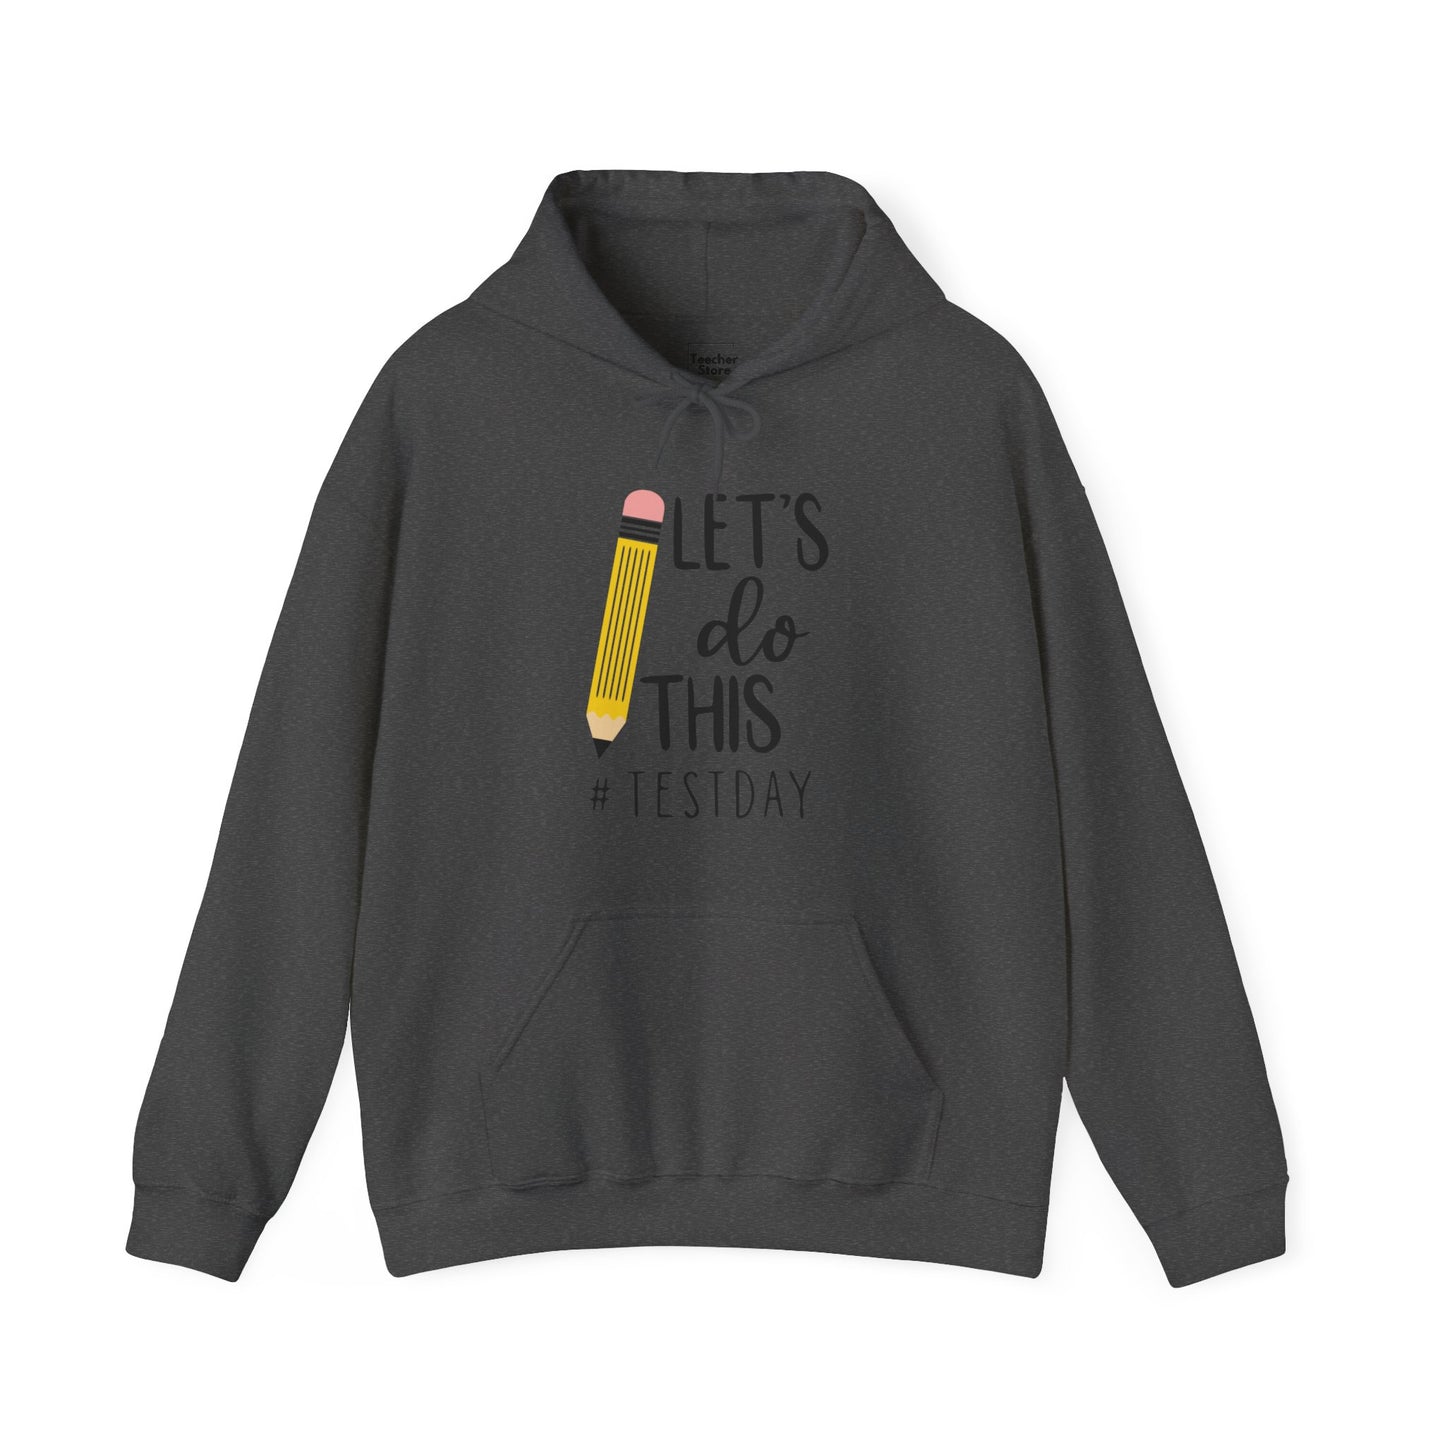 Let's Do This Hooded Sweatshirt